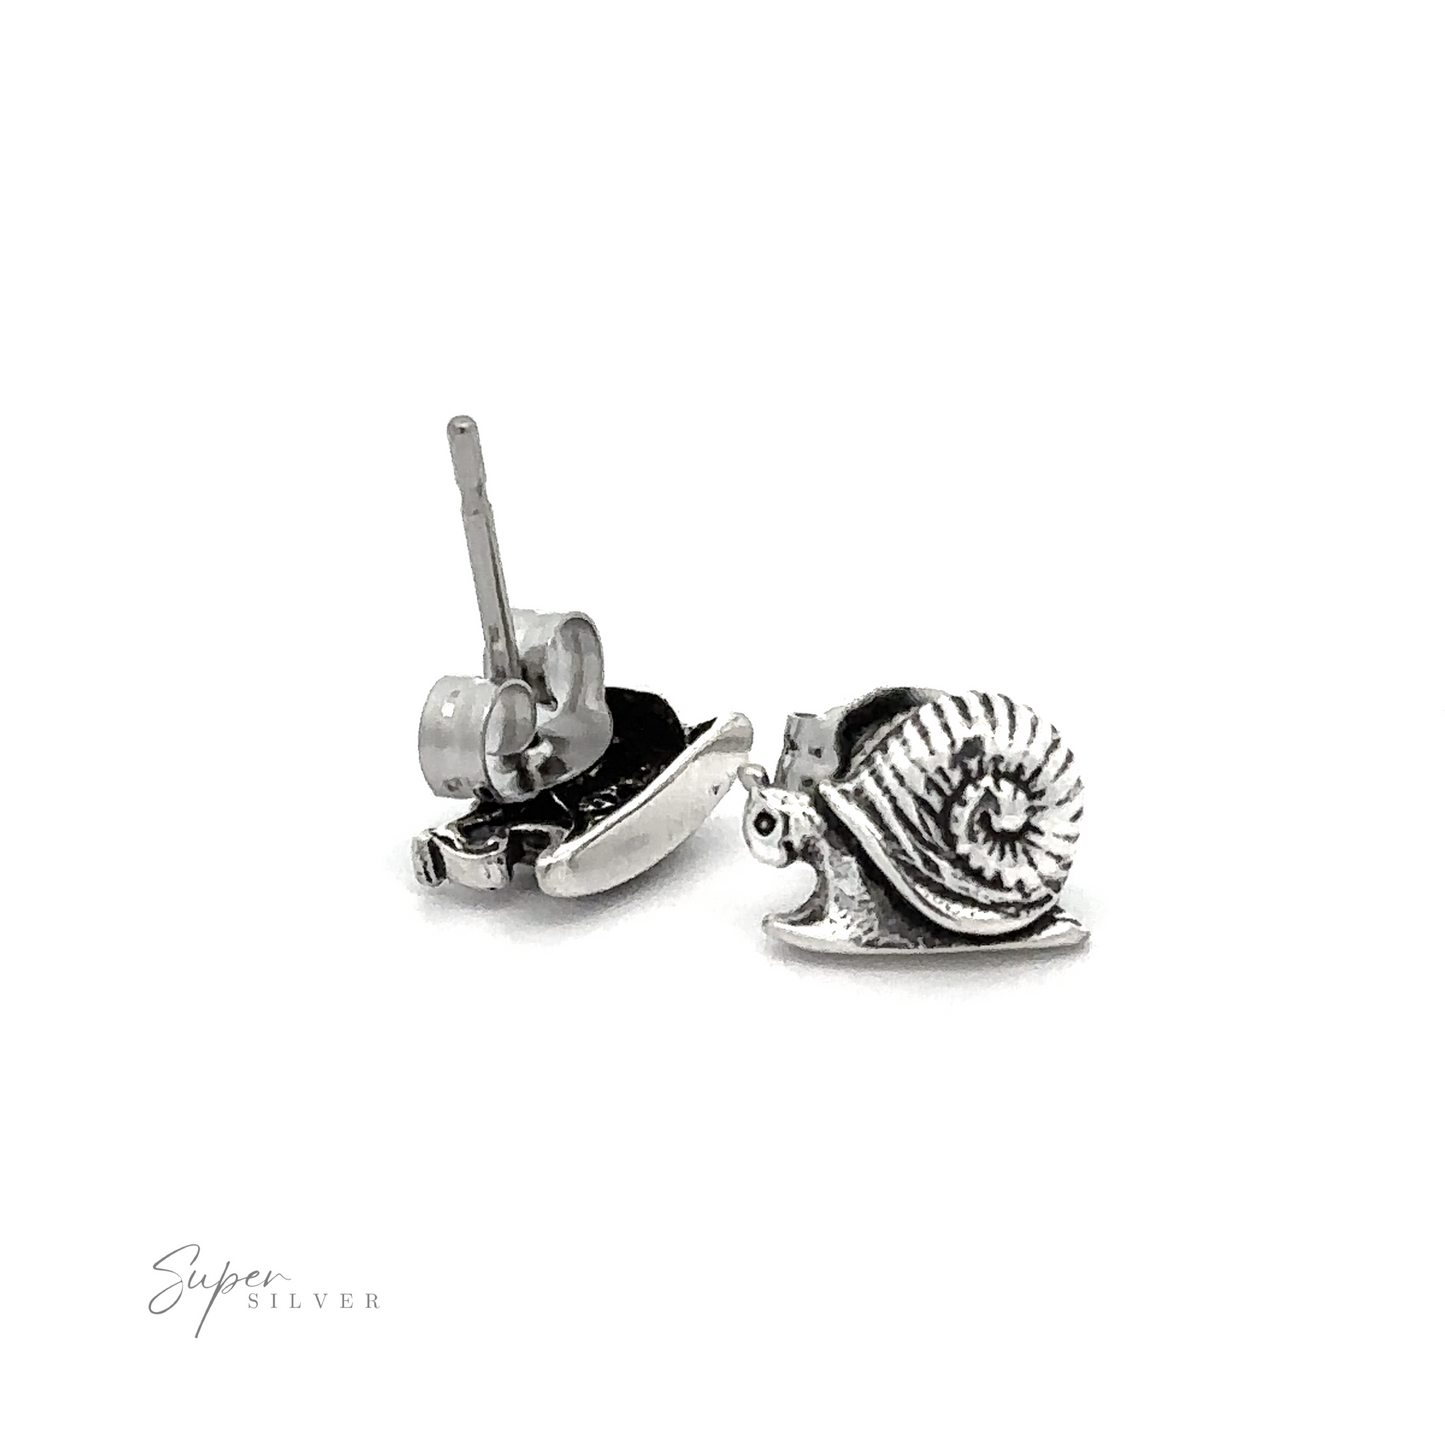 These whimsical sterling silver Snail Studs add a touch of charm to any outfit.